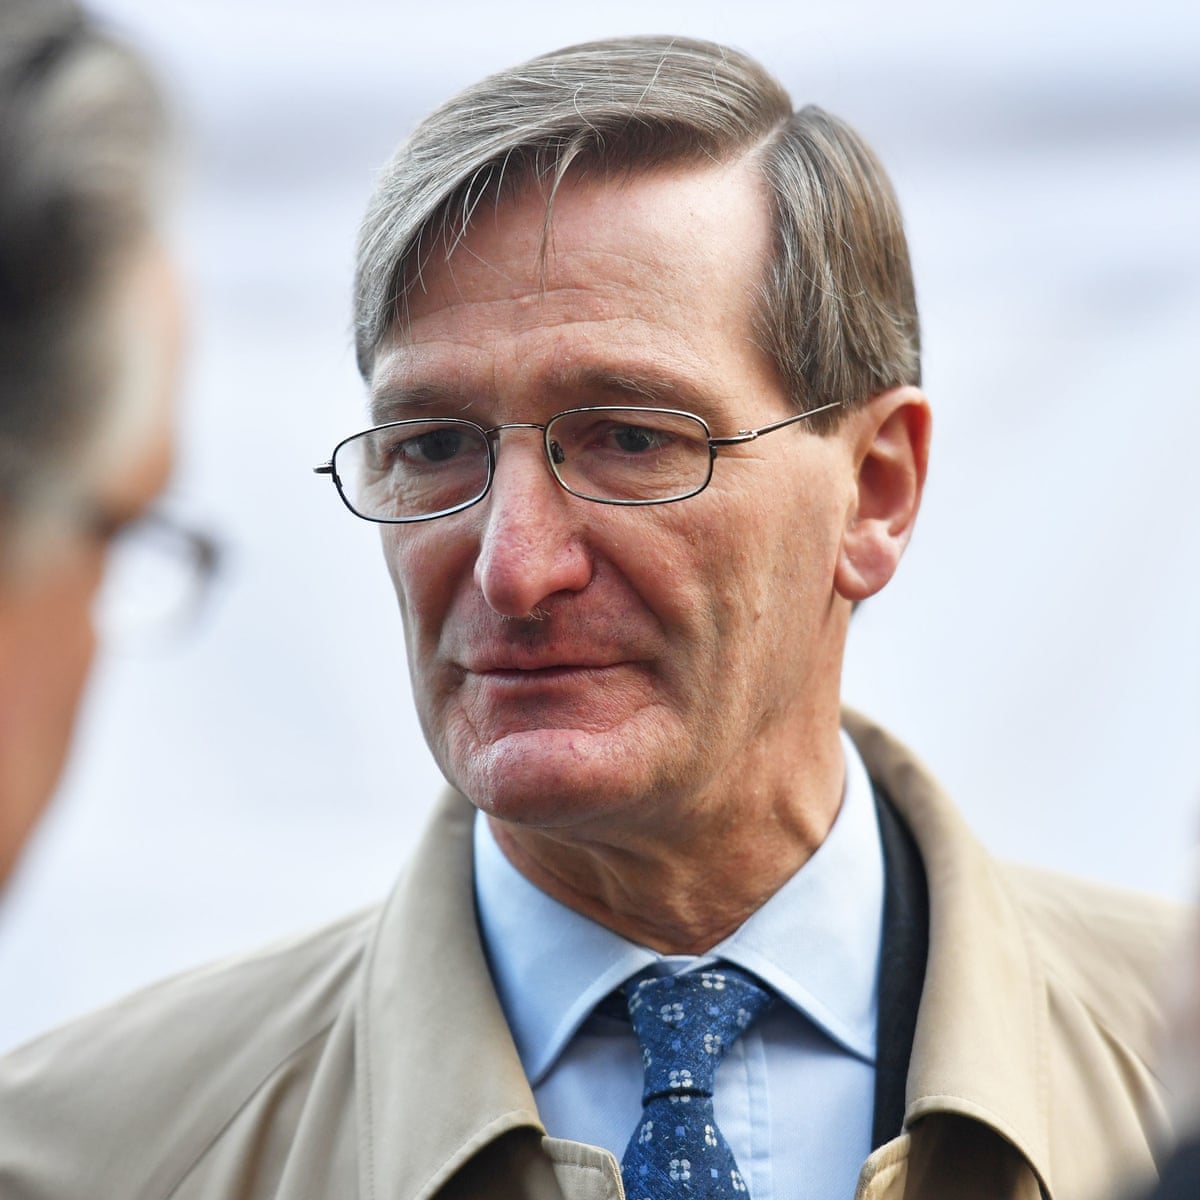 MPs should launch Afghanistan inquiry, says Dominic Grieve, Foreign policy